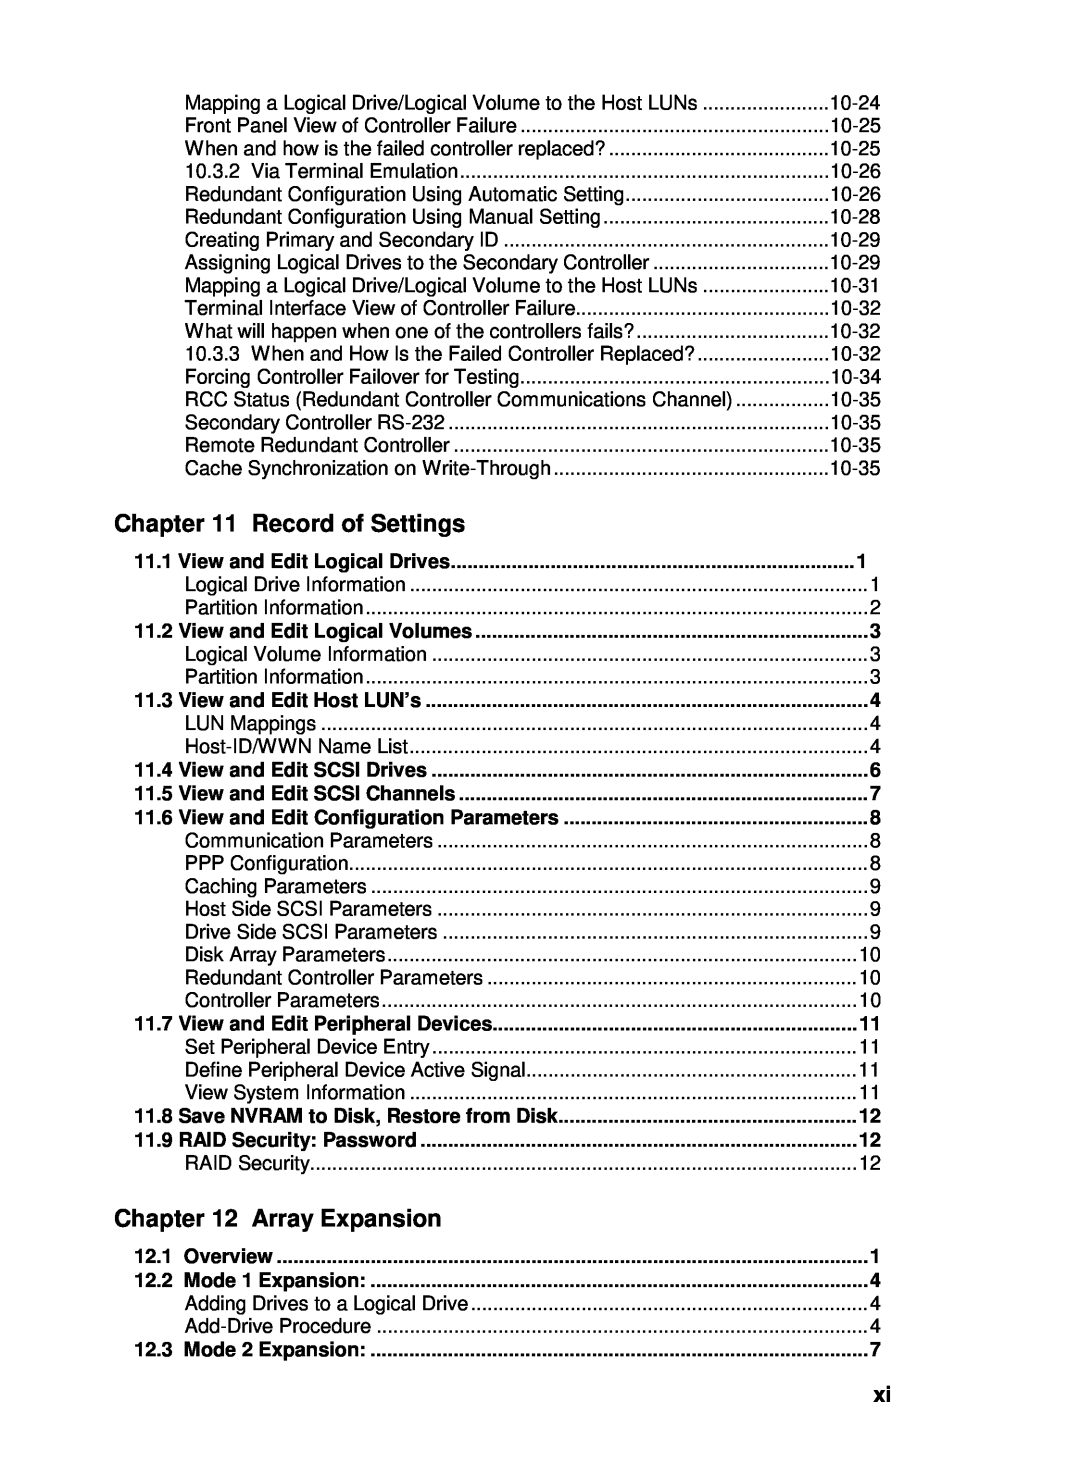 Compaq Infortrend manual Record of Settings, Array Expansion 